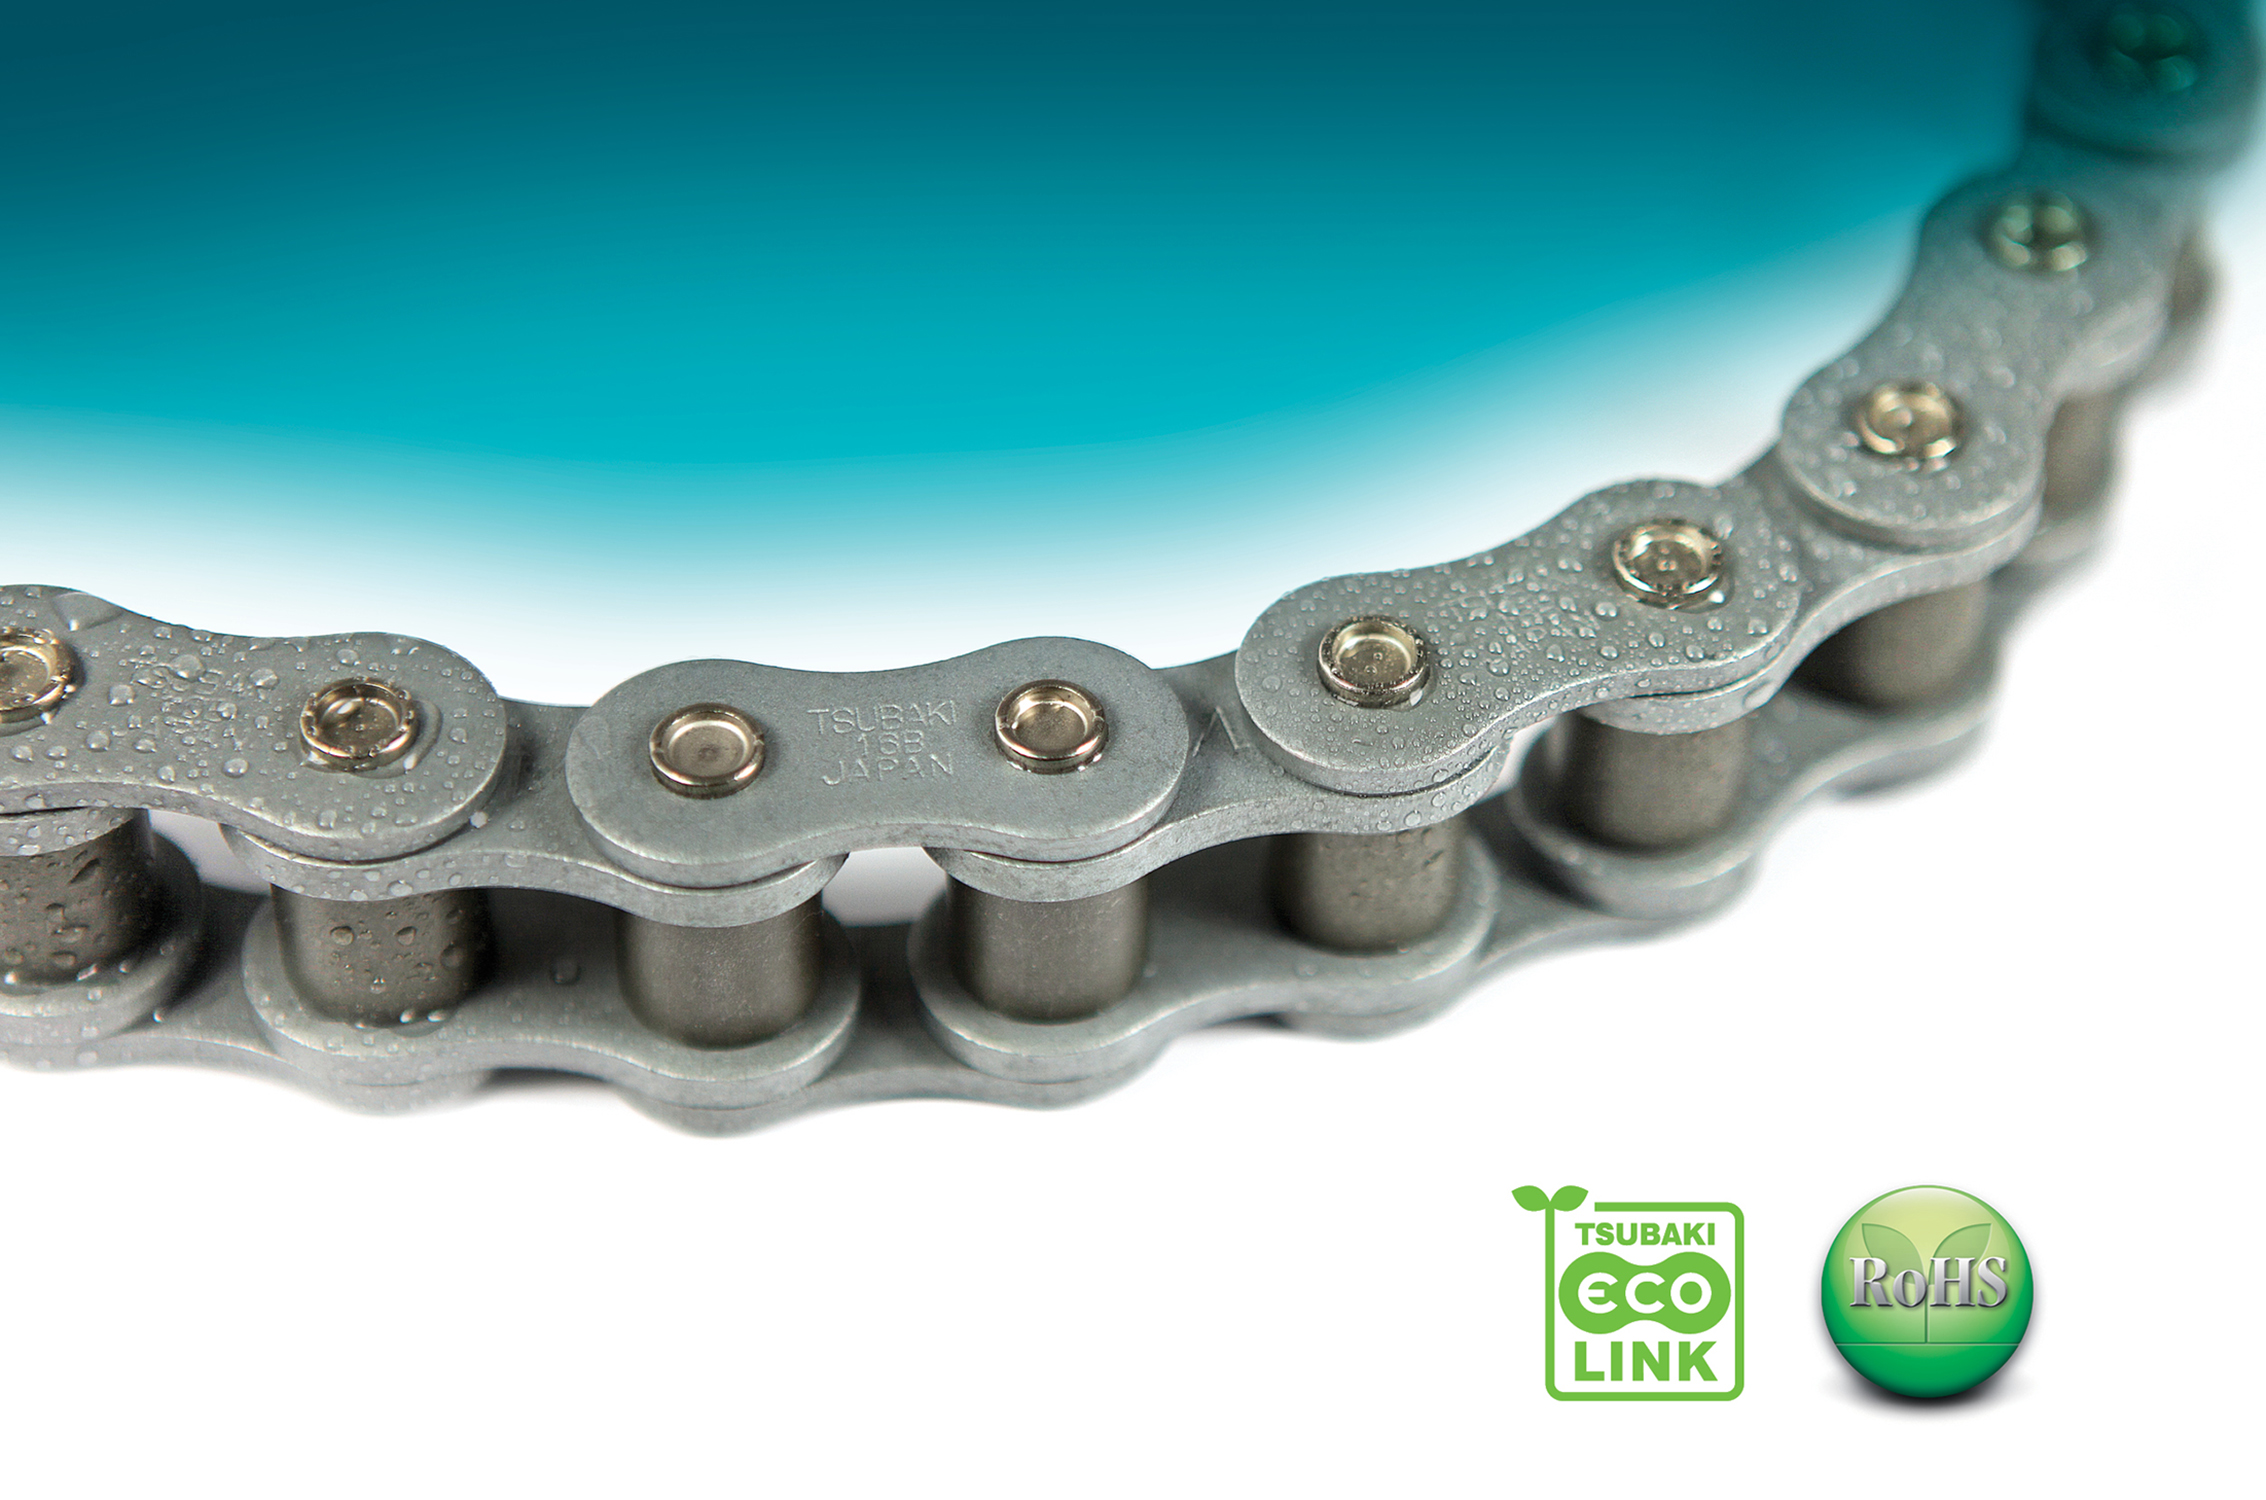 Tsubaki provided the beverage manufacturer with the lube-free RS12B-1 Lambda Neptune™ roller chain. Its inherent resistance to corrosion ensured an instant improvement in reliability.